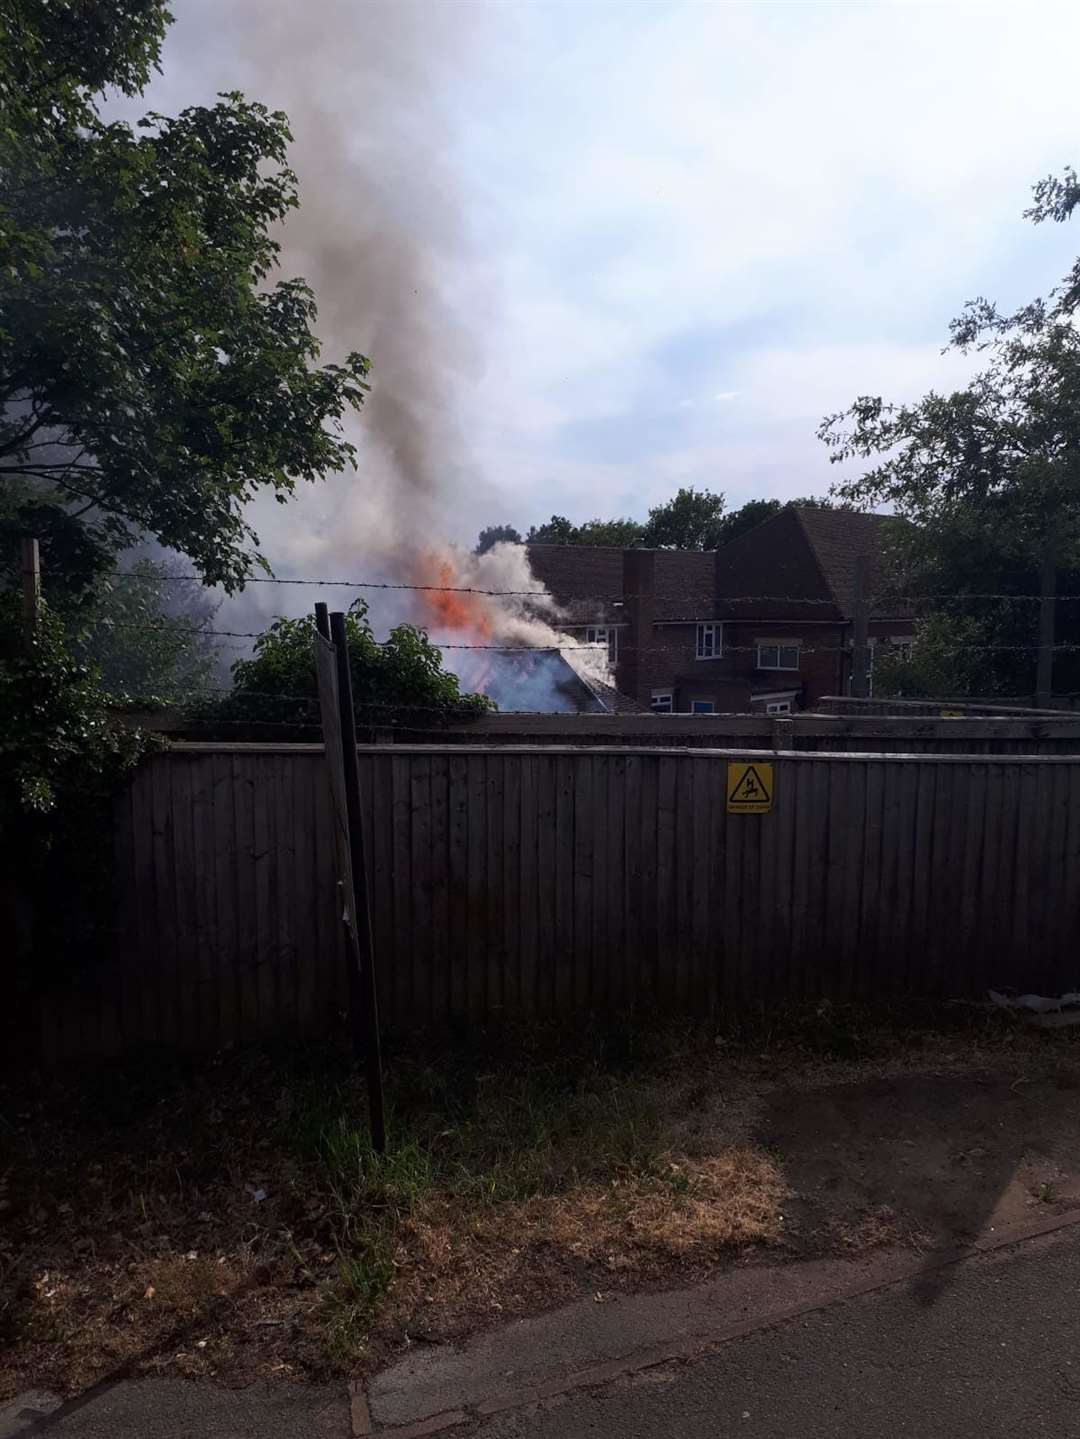 It's thought the fire started in an outhouse behind North Borough Junior School. Picture: Paul McPolin